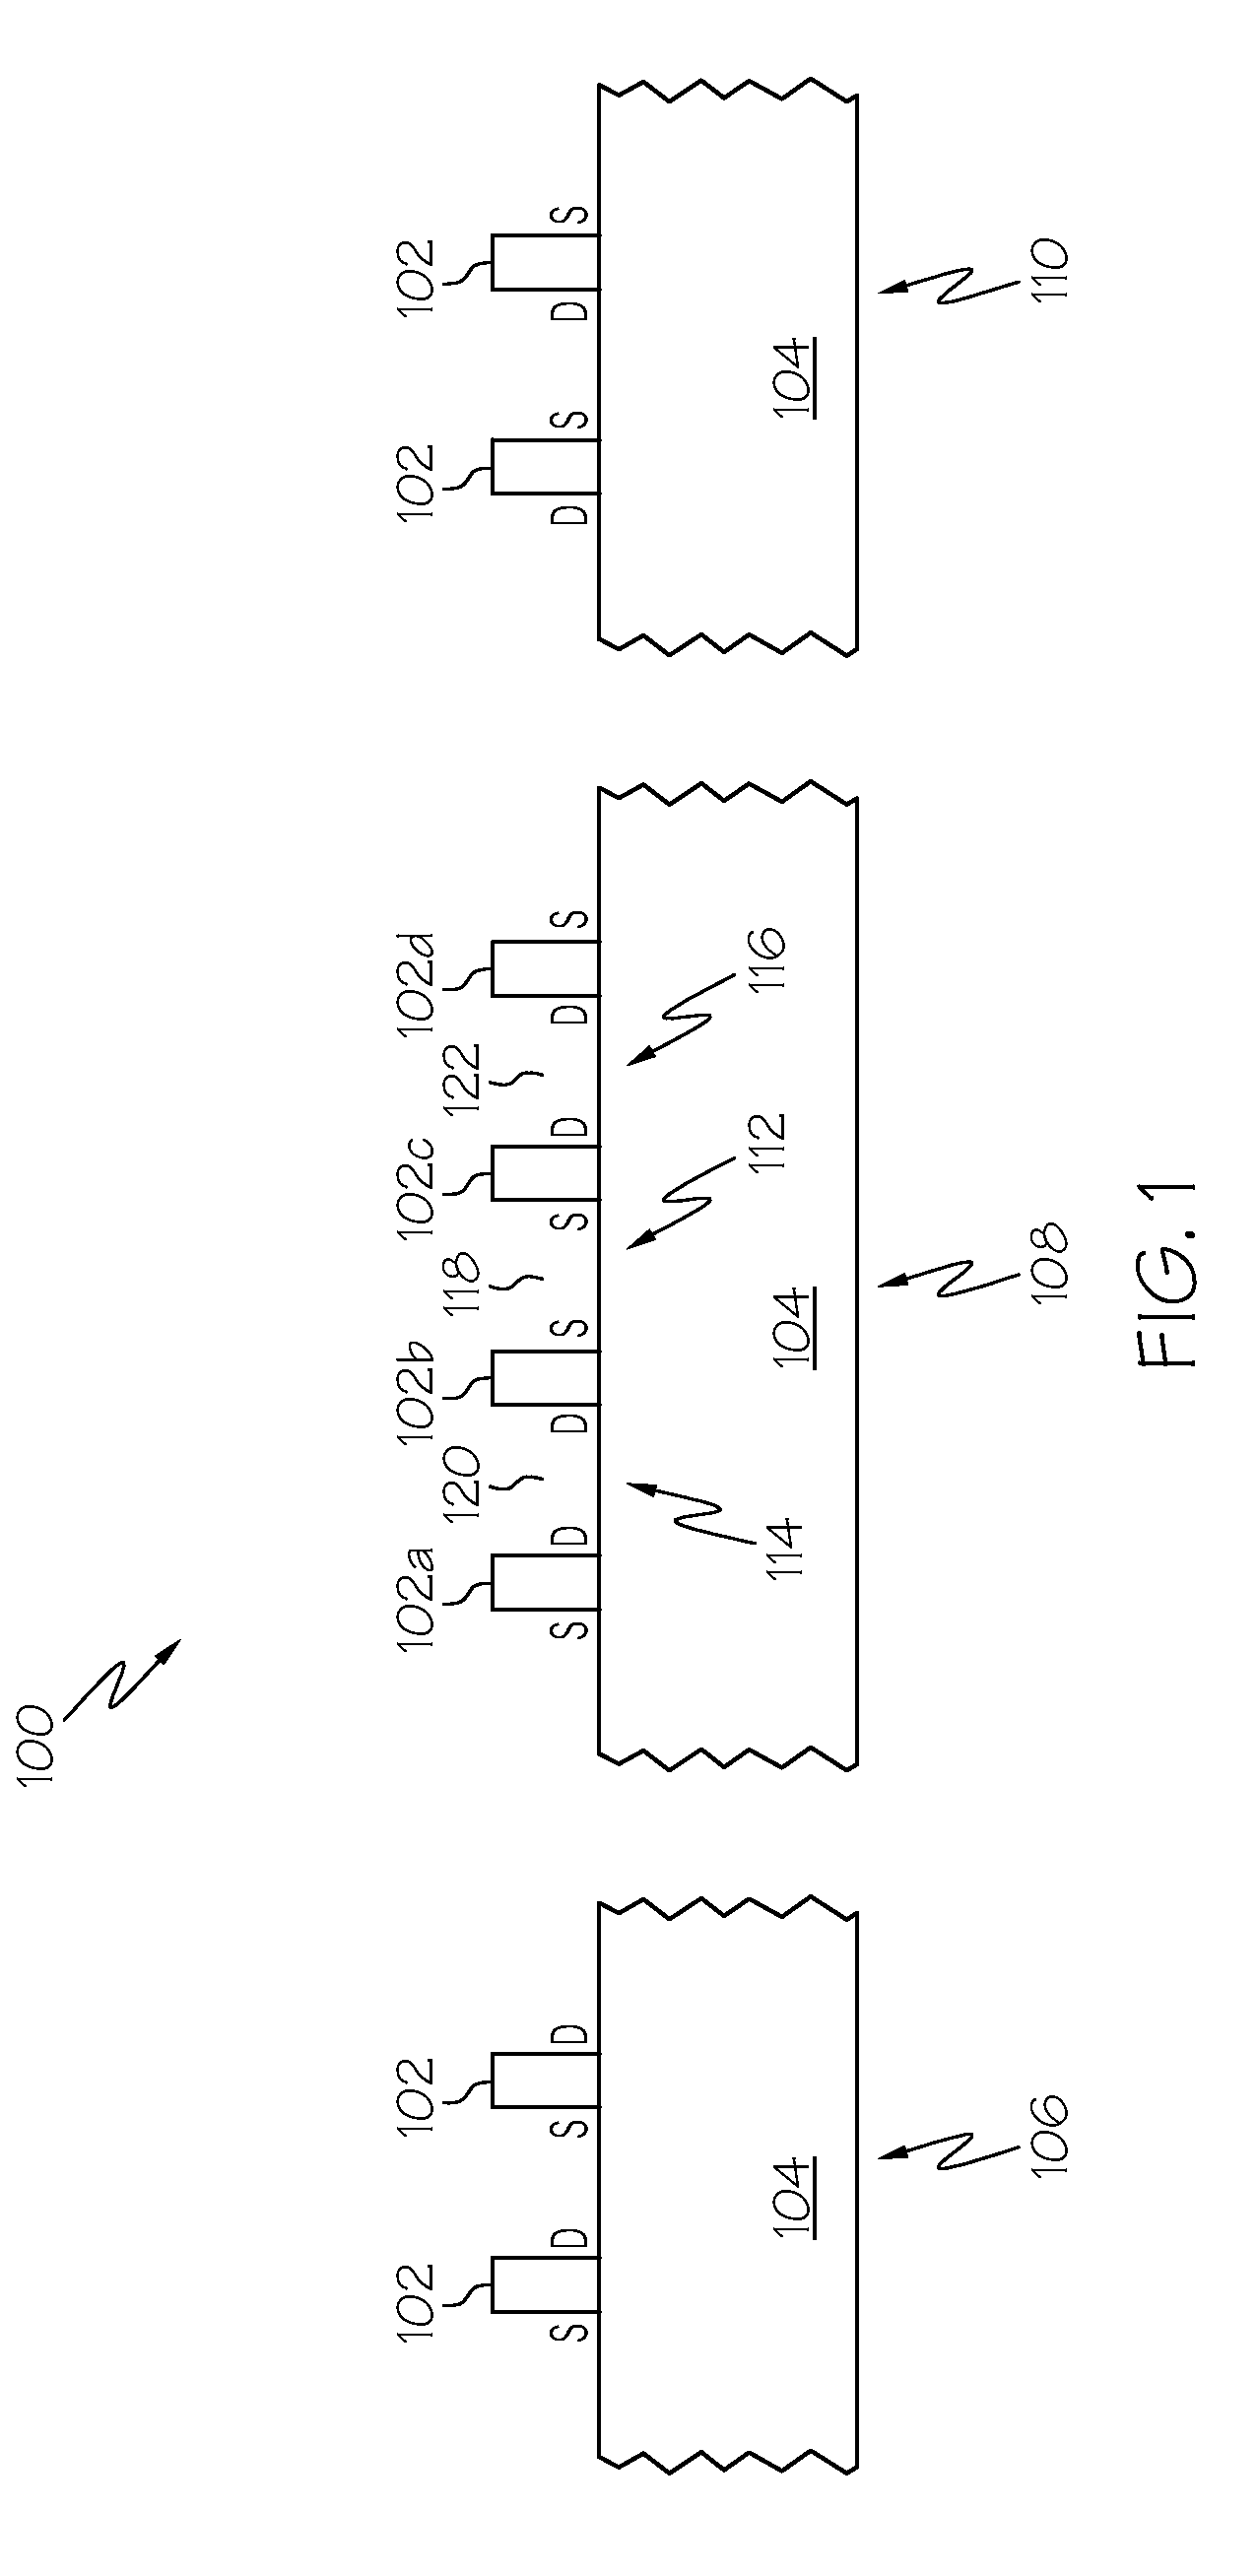 Method of fabricating semiconductor transistor devices with asymmetric extension and/or halo implants